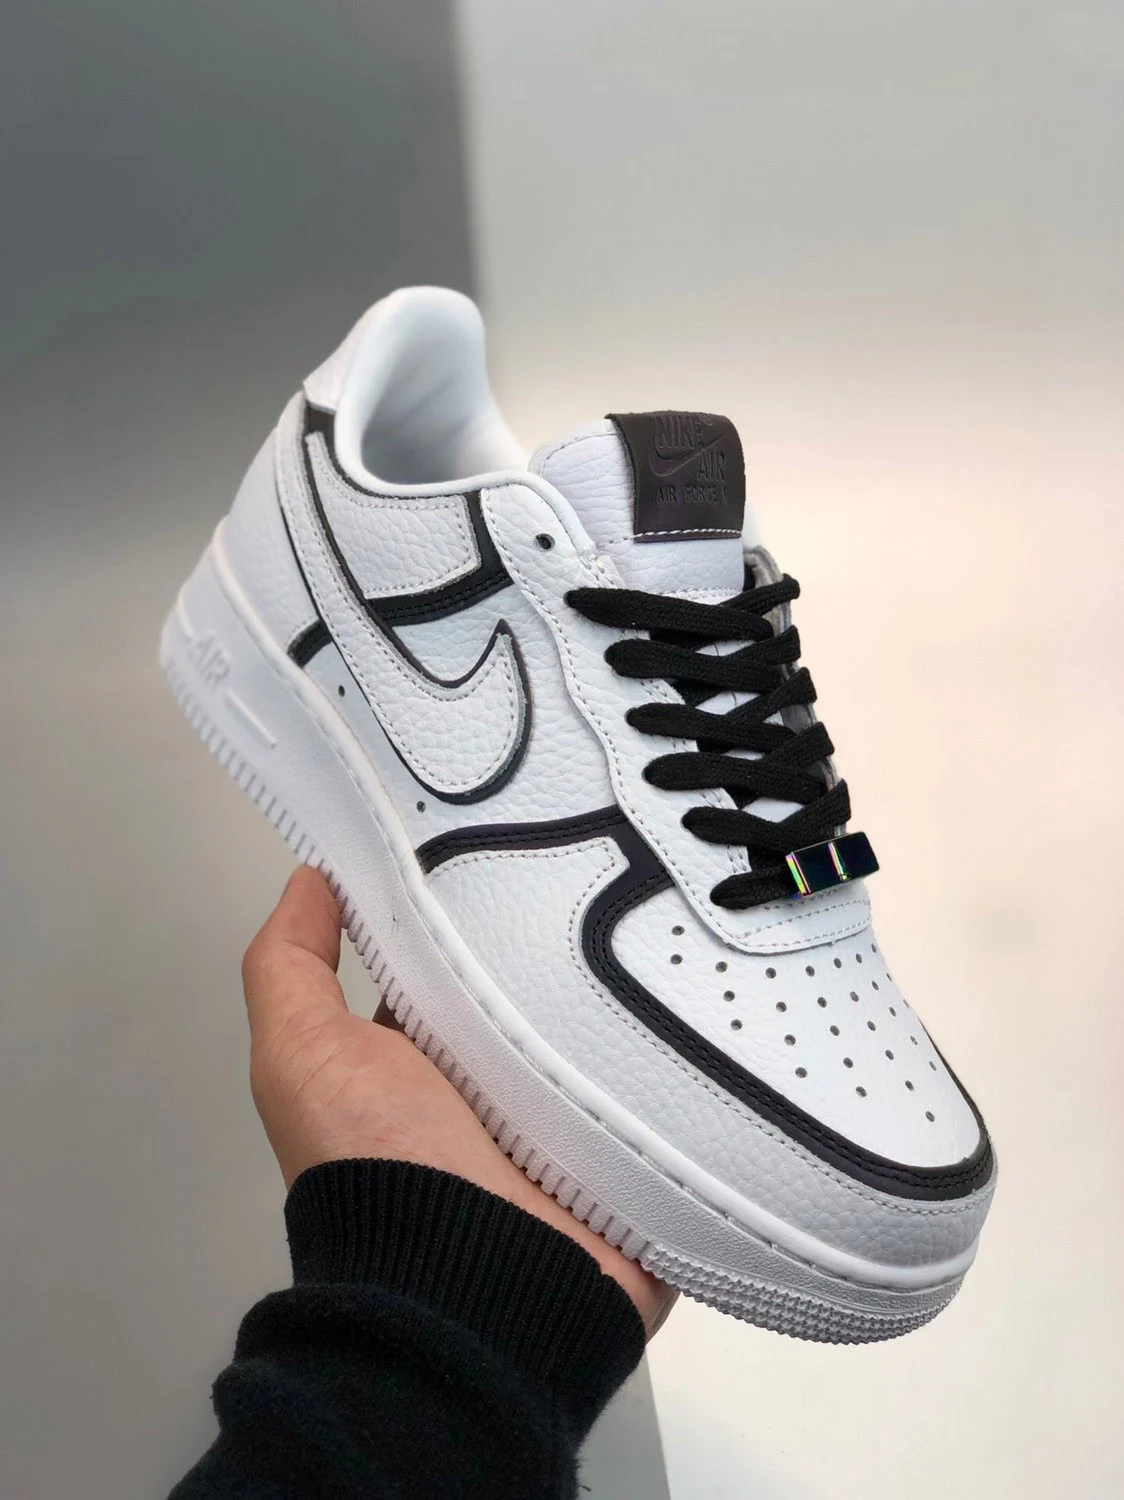 Joshua Vides X Nike Air Force 1 Low White Black For Sale